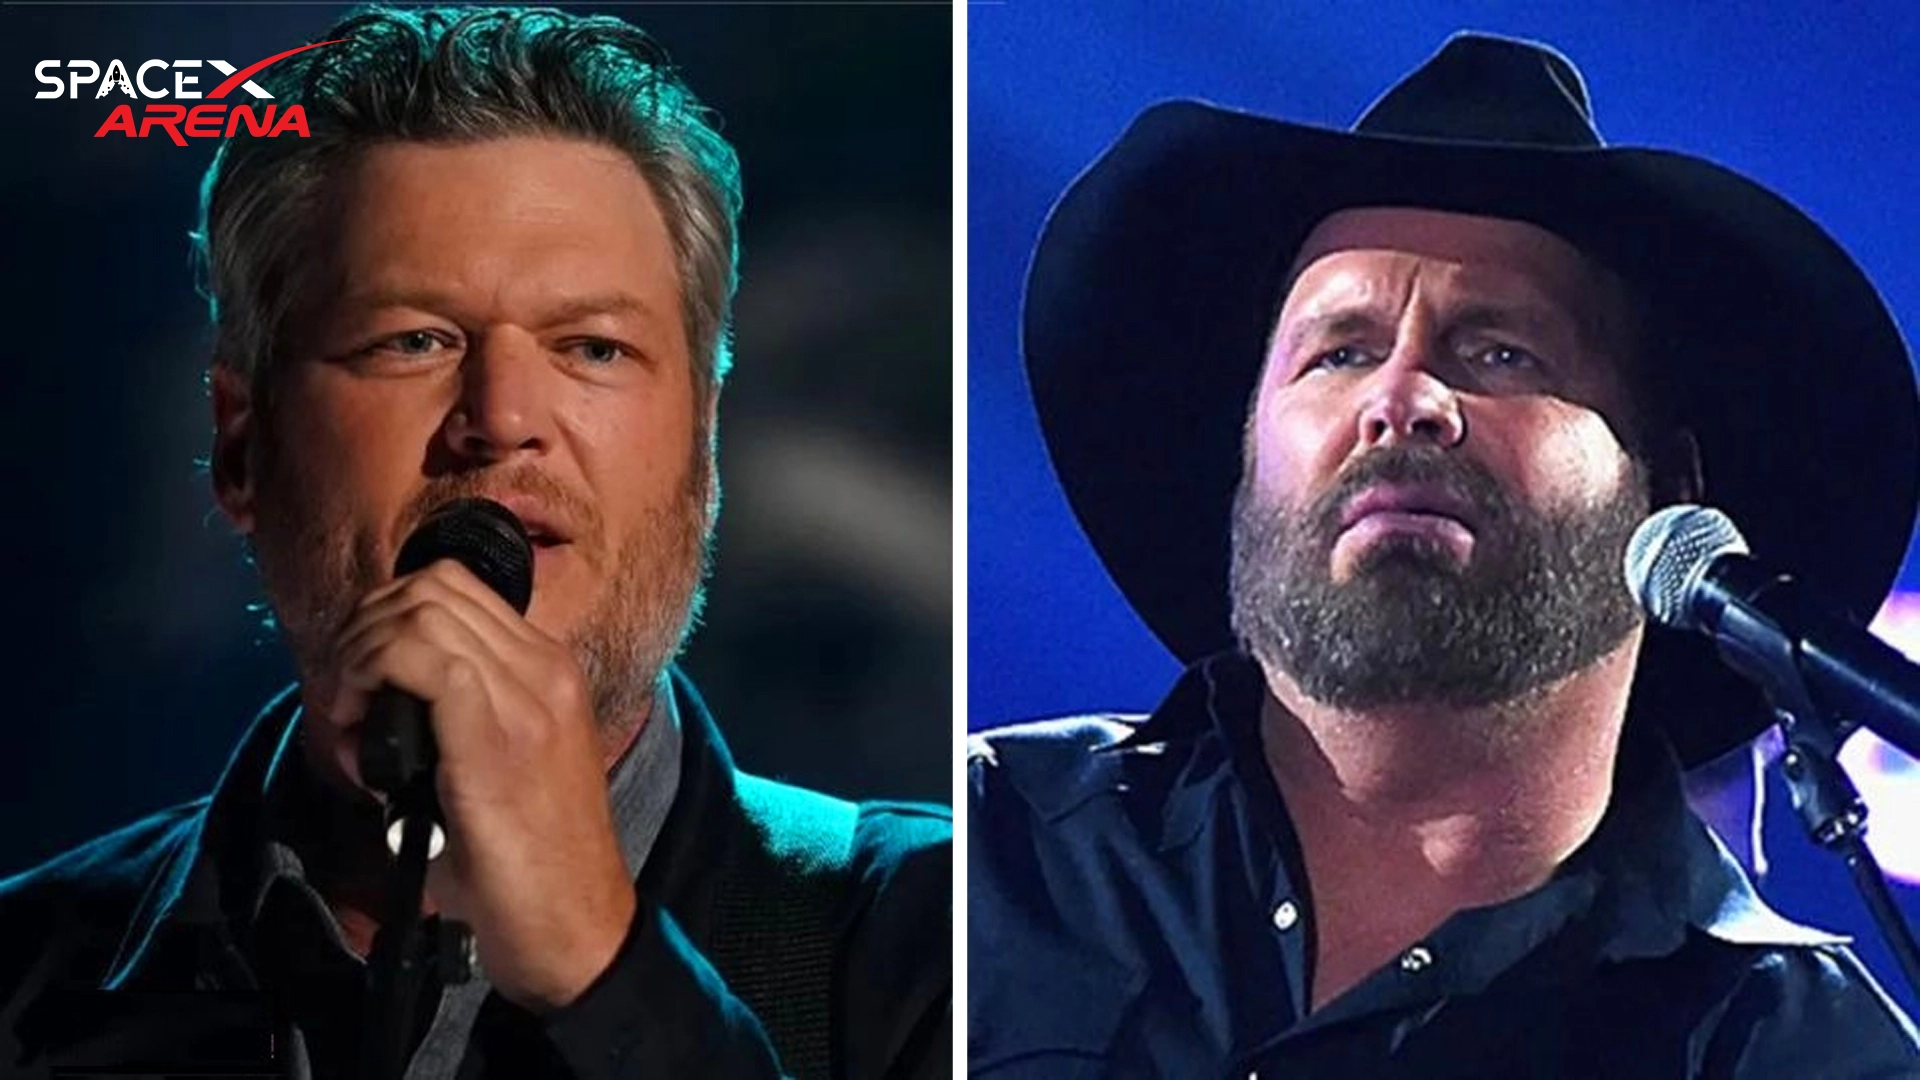 With Garth Brooks, Blake Shelton cancels a $20 million project